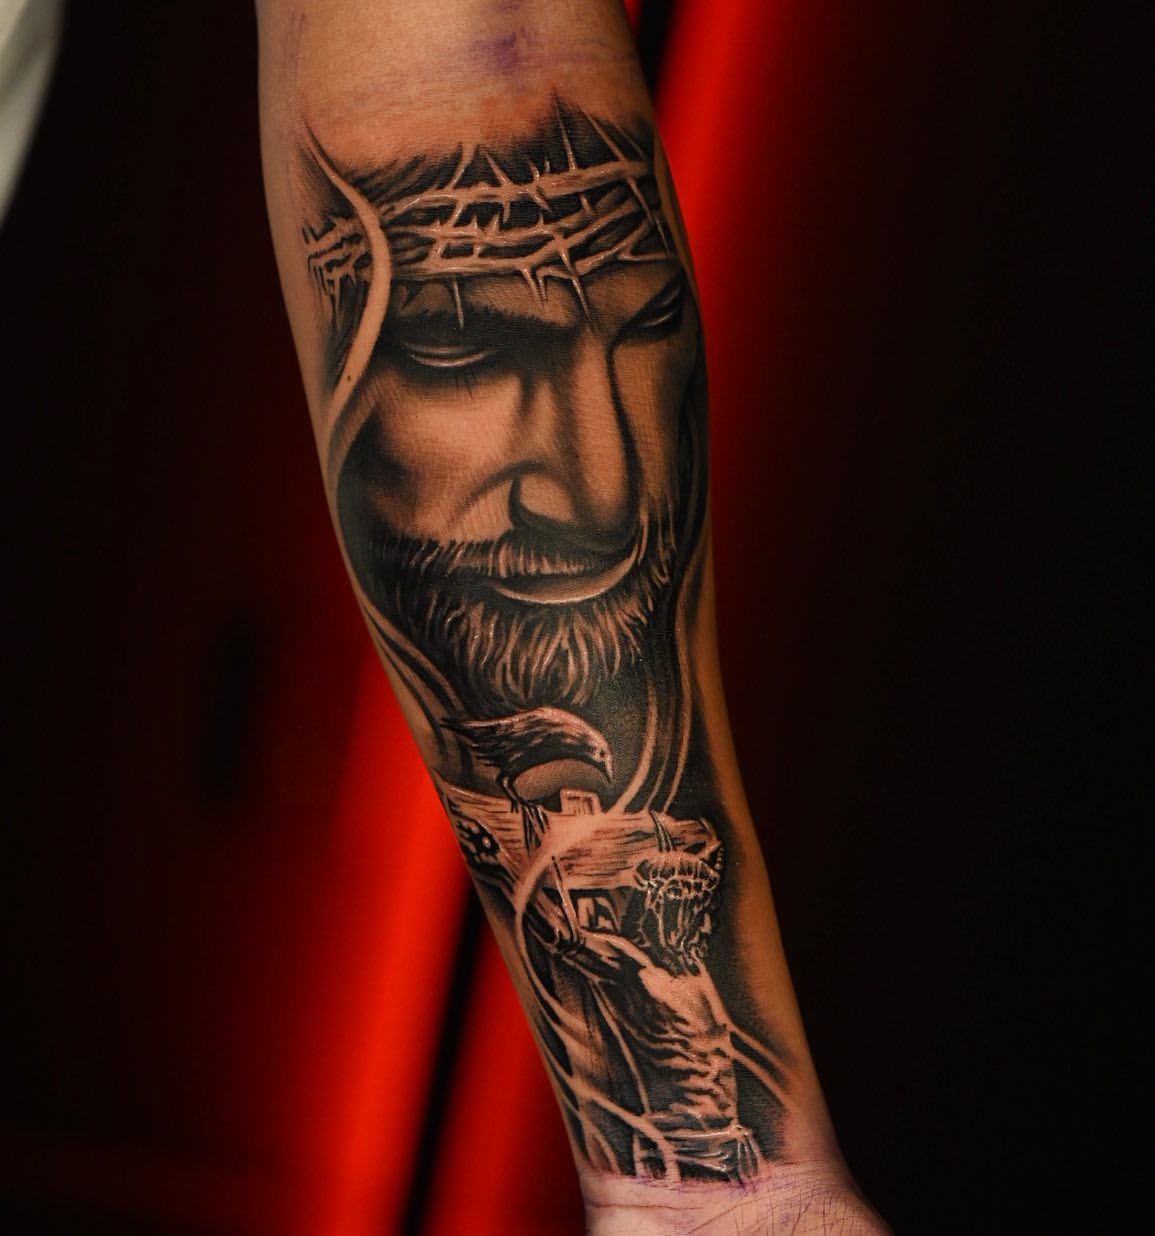 Chastened Intuitions: Are Tattoos OK for Christians? (Part 1)